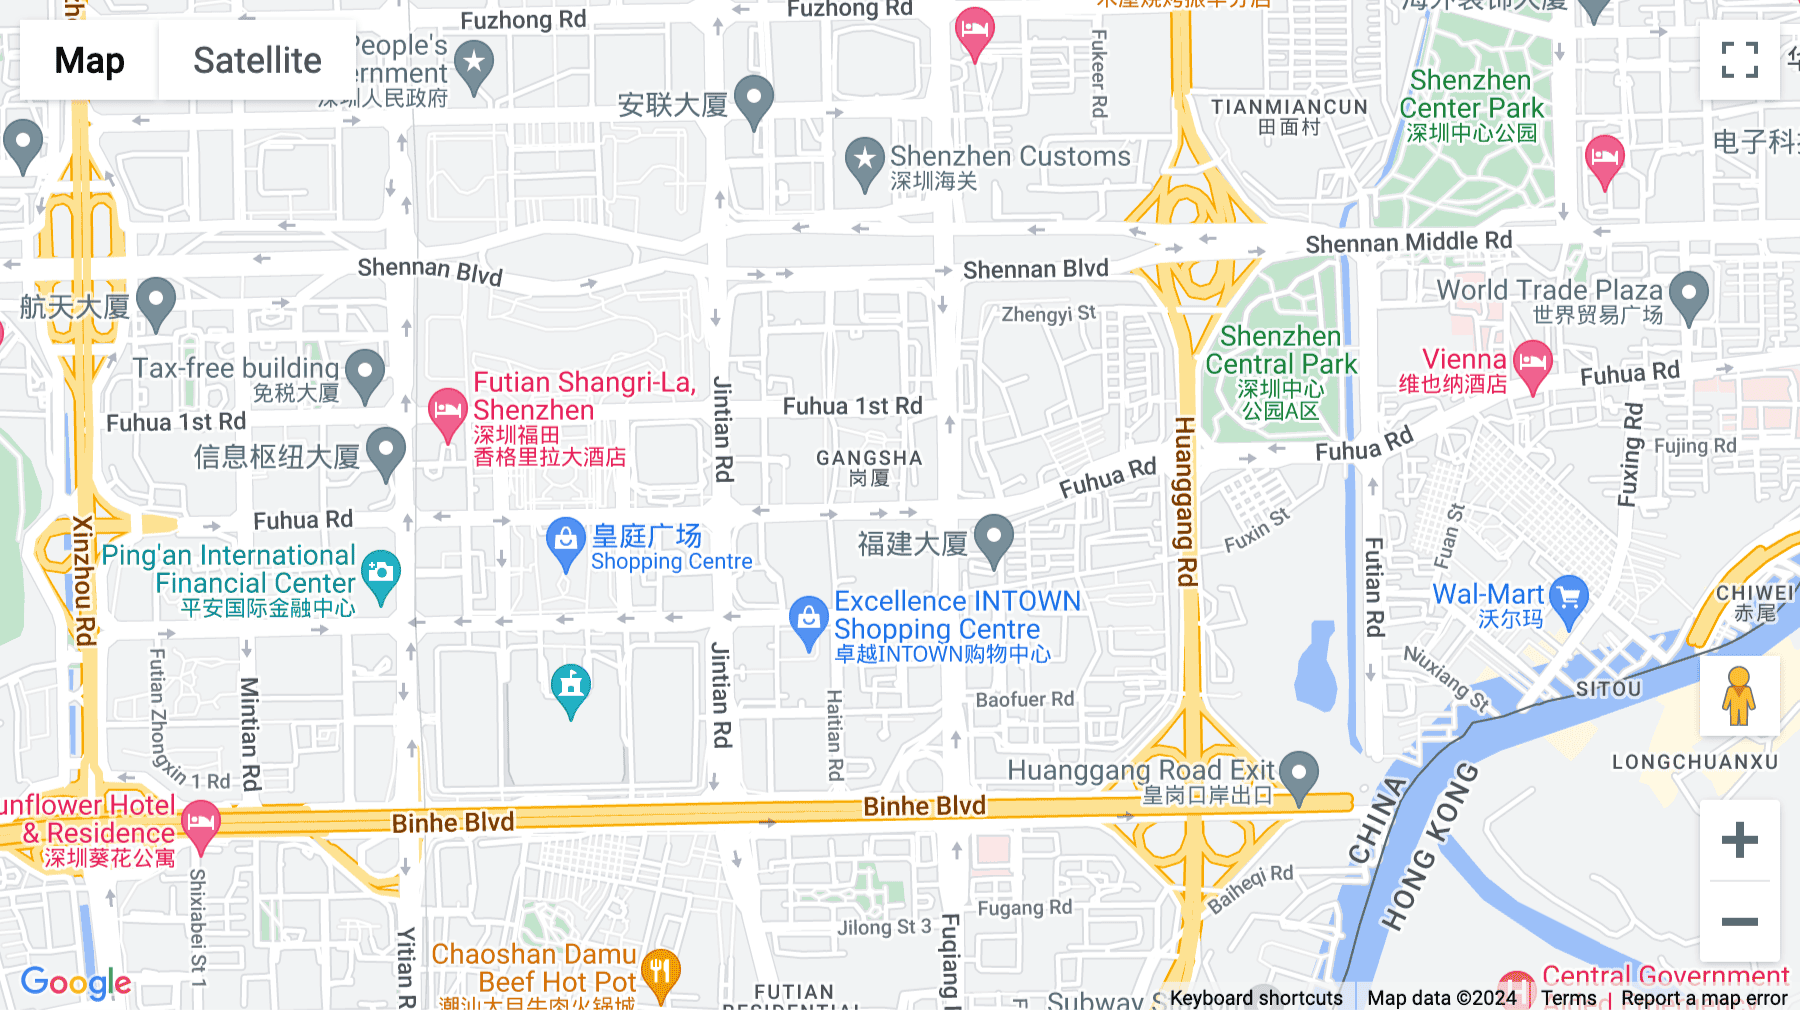 Click for interative map of Caifu Building, Jufuge, Caitian Road, Shenzhen